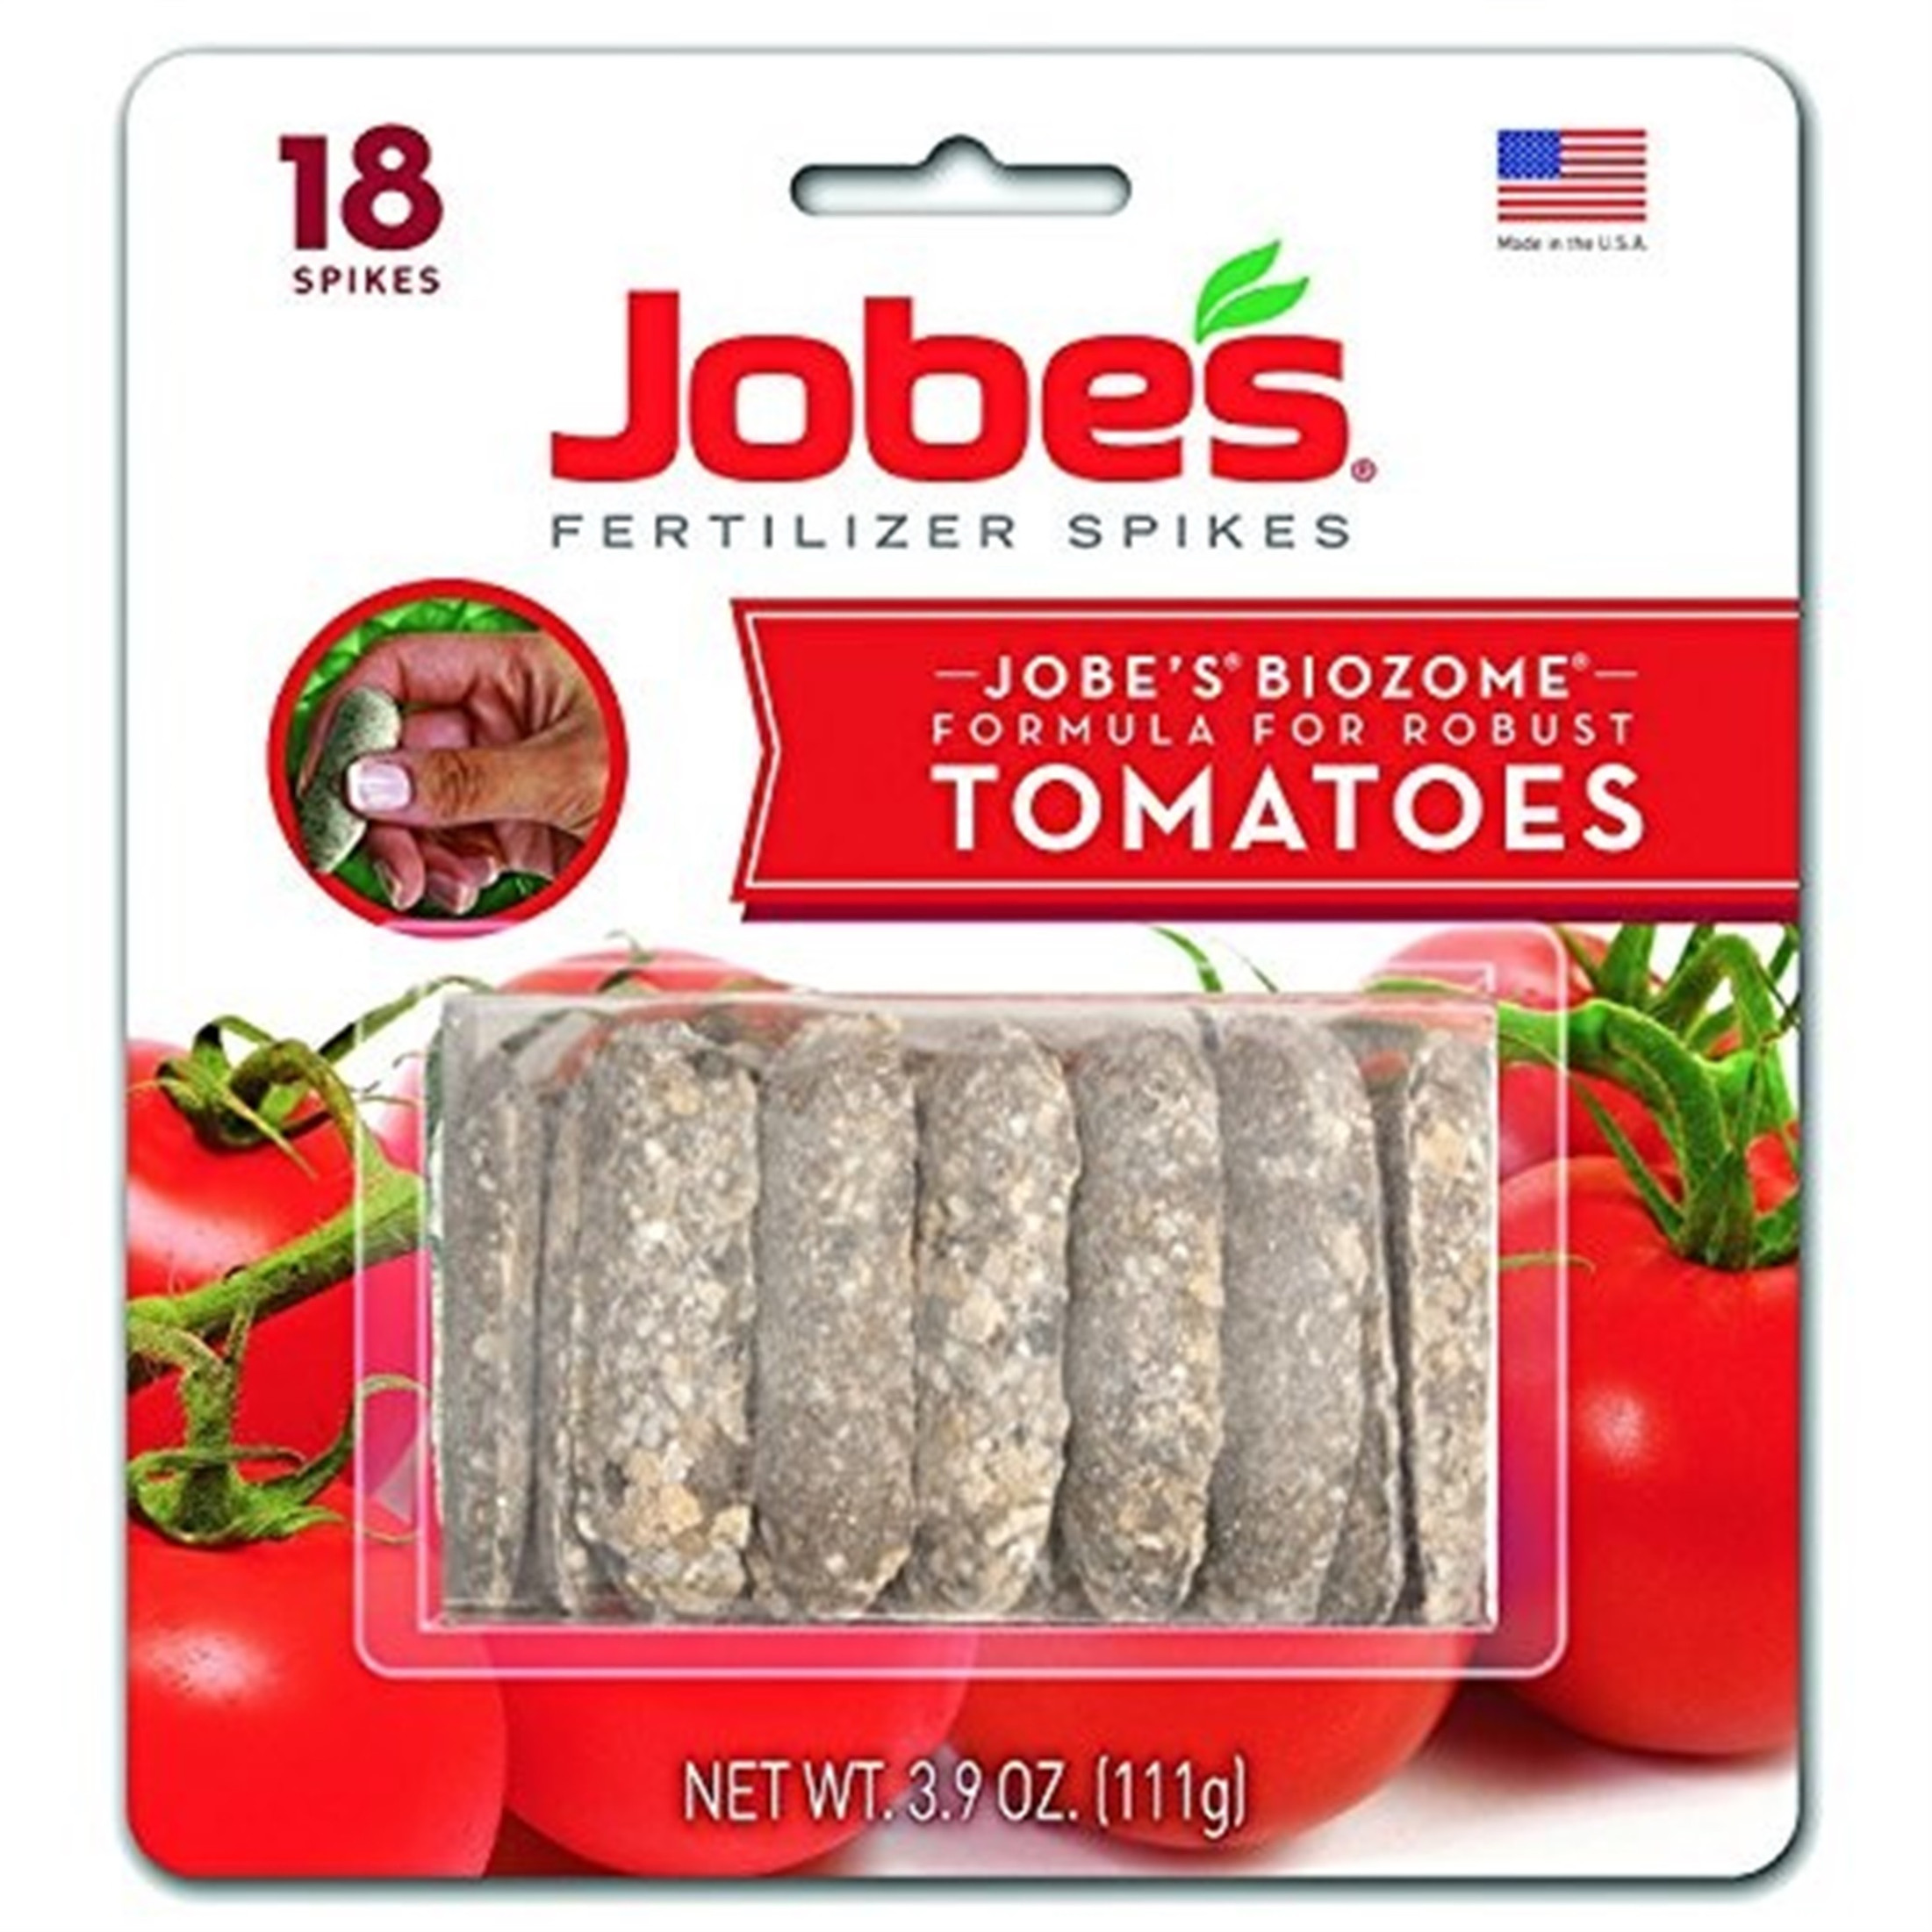 Jobes Tomato Fertilizer Spikes, 6-18-6 Time Release Fertilizer for All Tomato Plants, 18 Spikes per Blister Package, 3-Pack, 54 Spikes Total